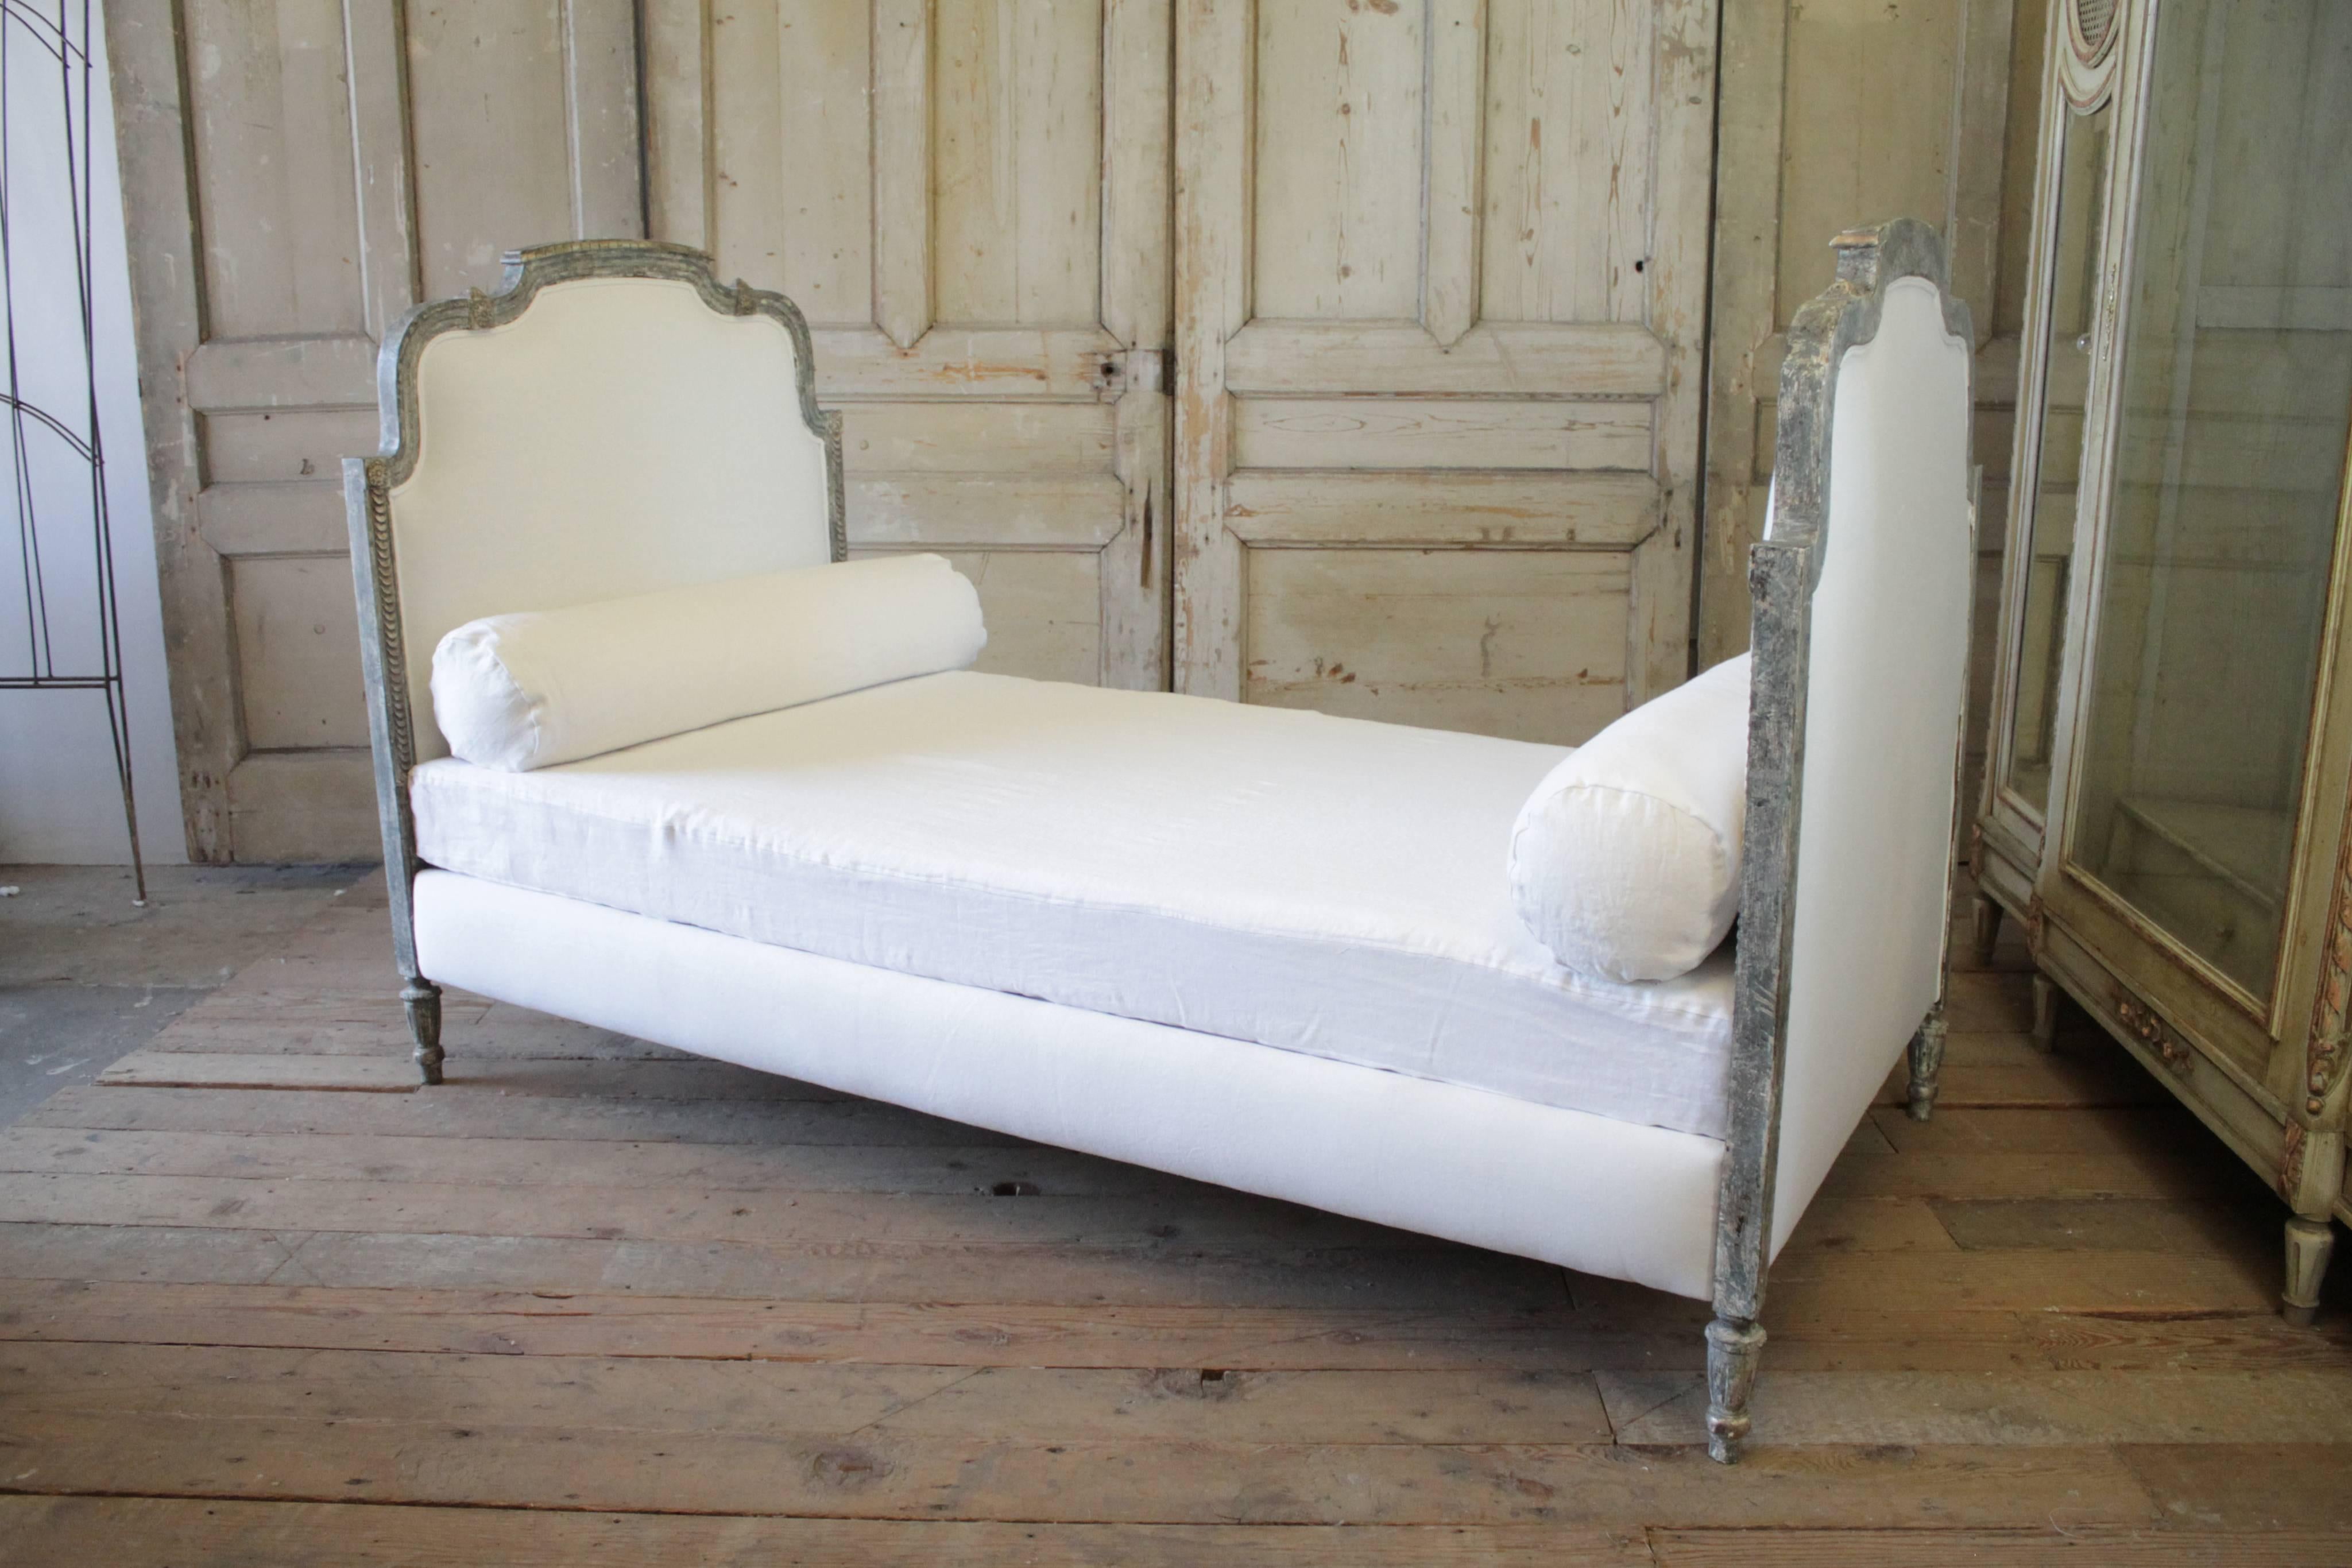 Beautiful original painted Louis XVI style daybed in a grey blue weathered patina, with hints of a silver leaf painted accents. We reupholstered this in a thick white Belgian linen and finished with a double welt edge. The rails for the bed were